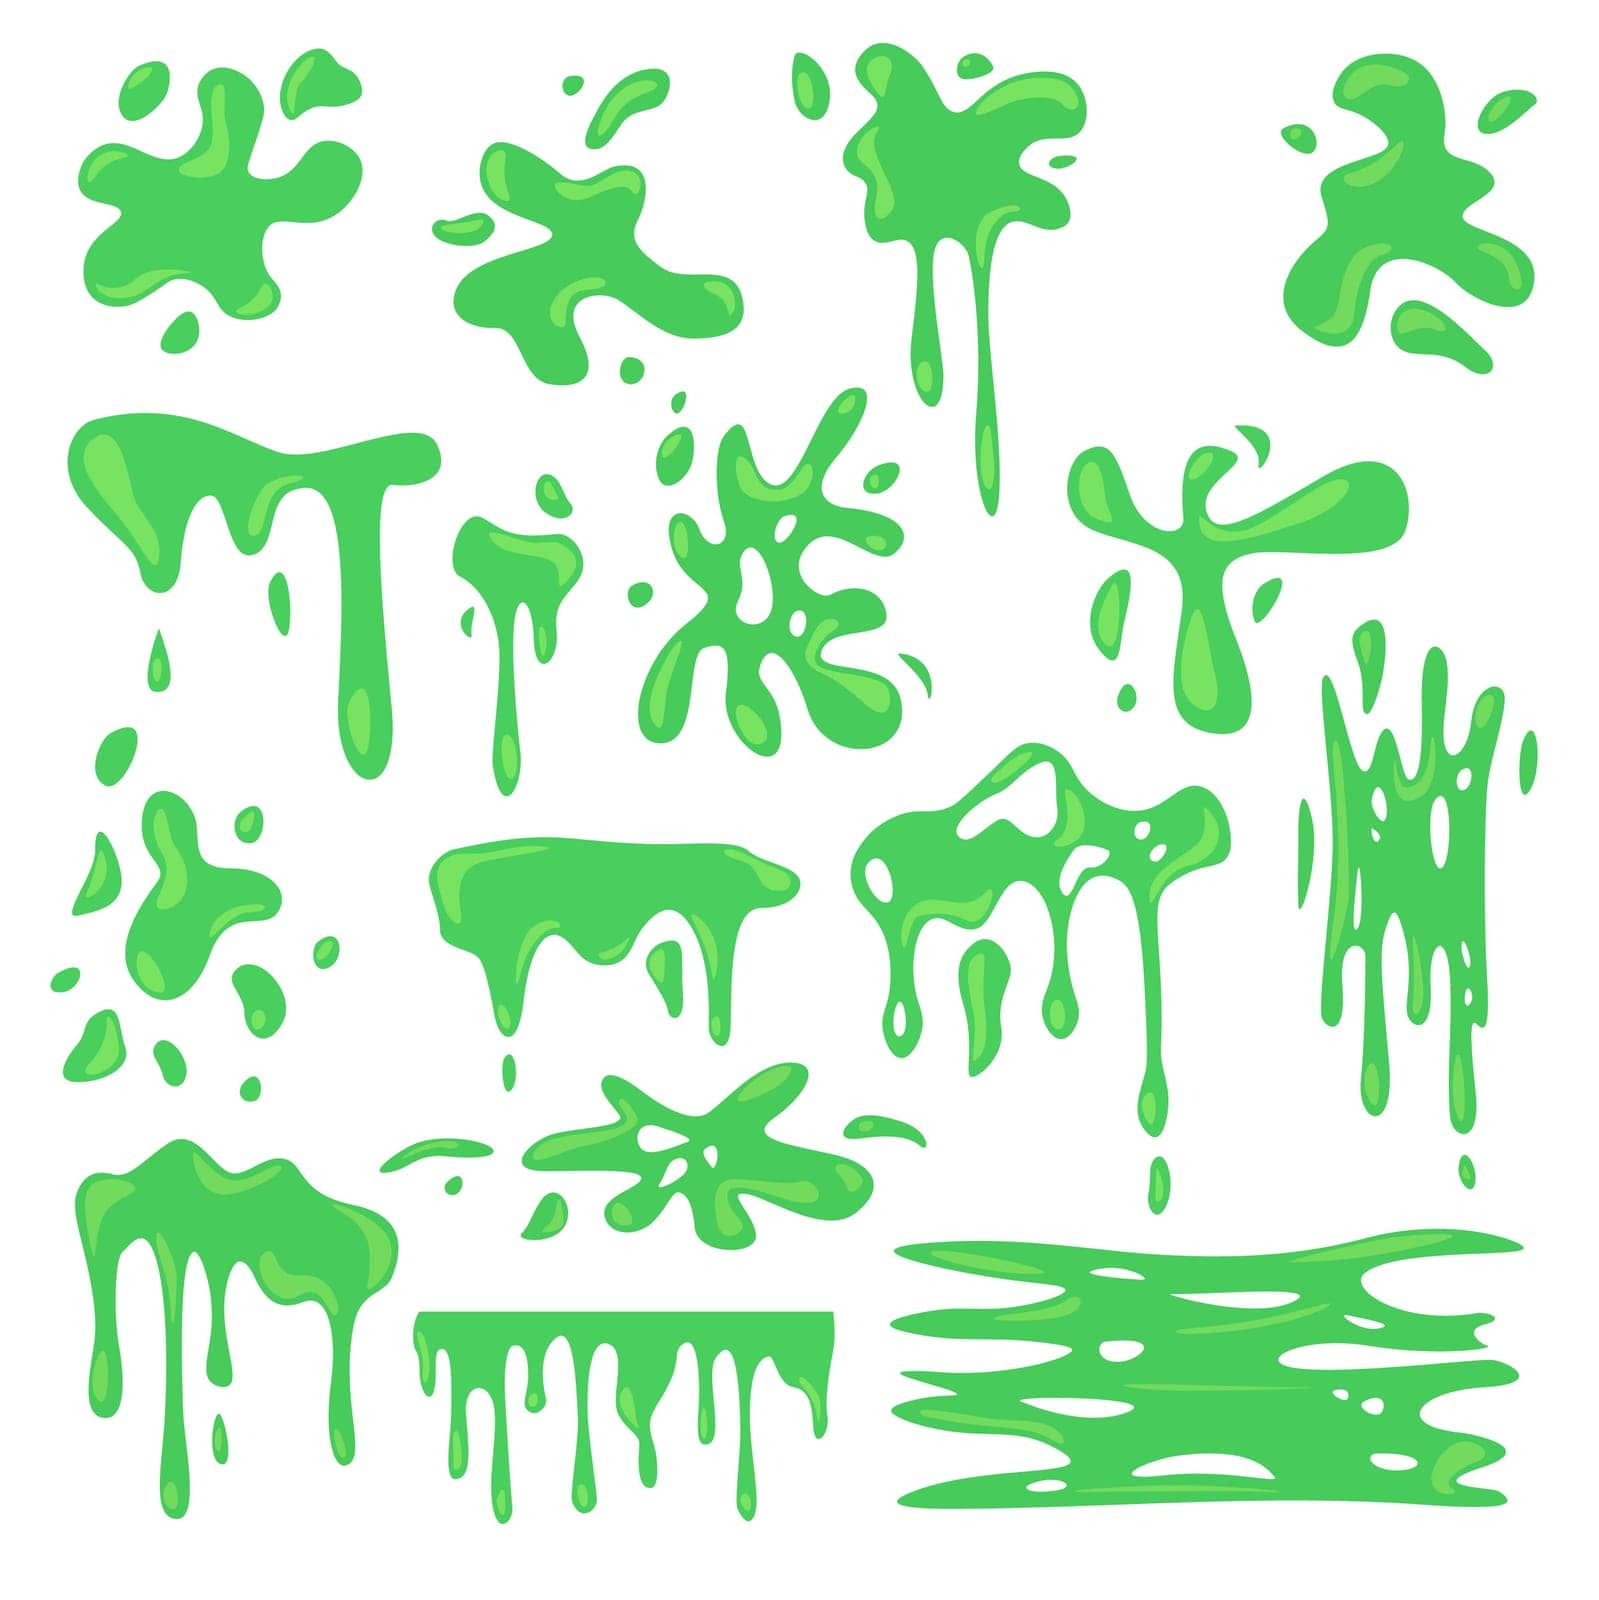 Toxic various green slime flat set for web design. Cartoon slimy goo splashes, blobs and mucus drops isolated vector illustration collection. Decorative shapes and liquid borders for design concept